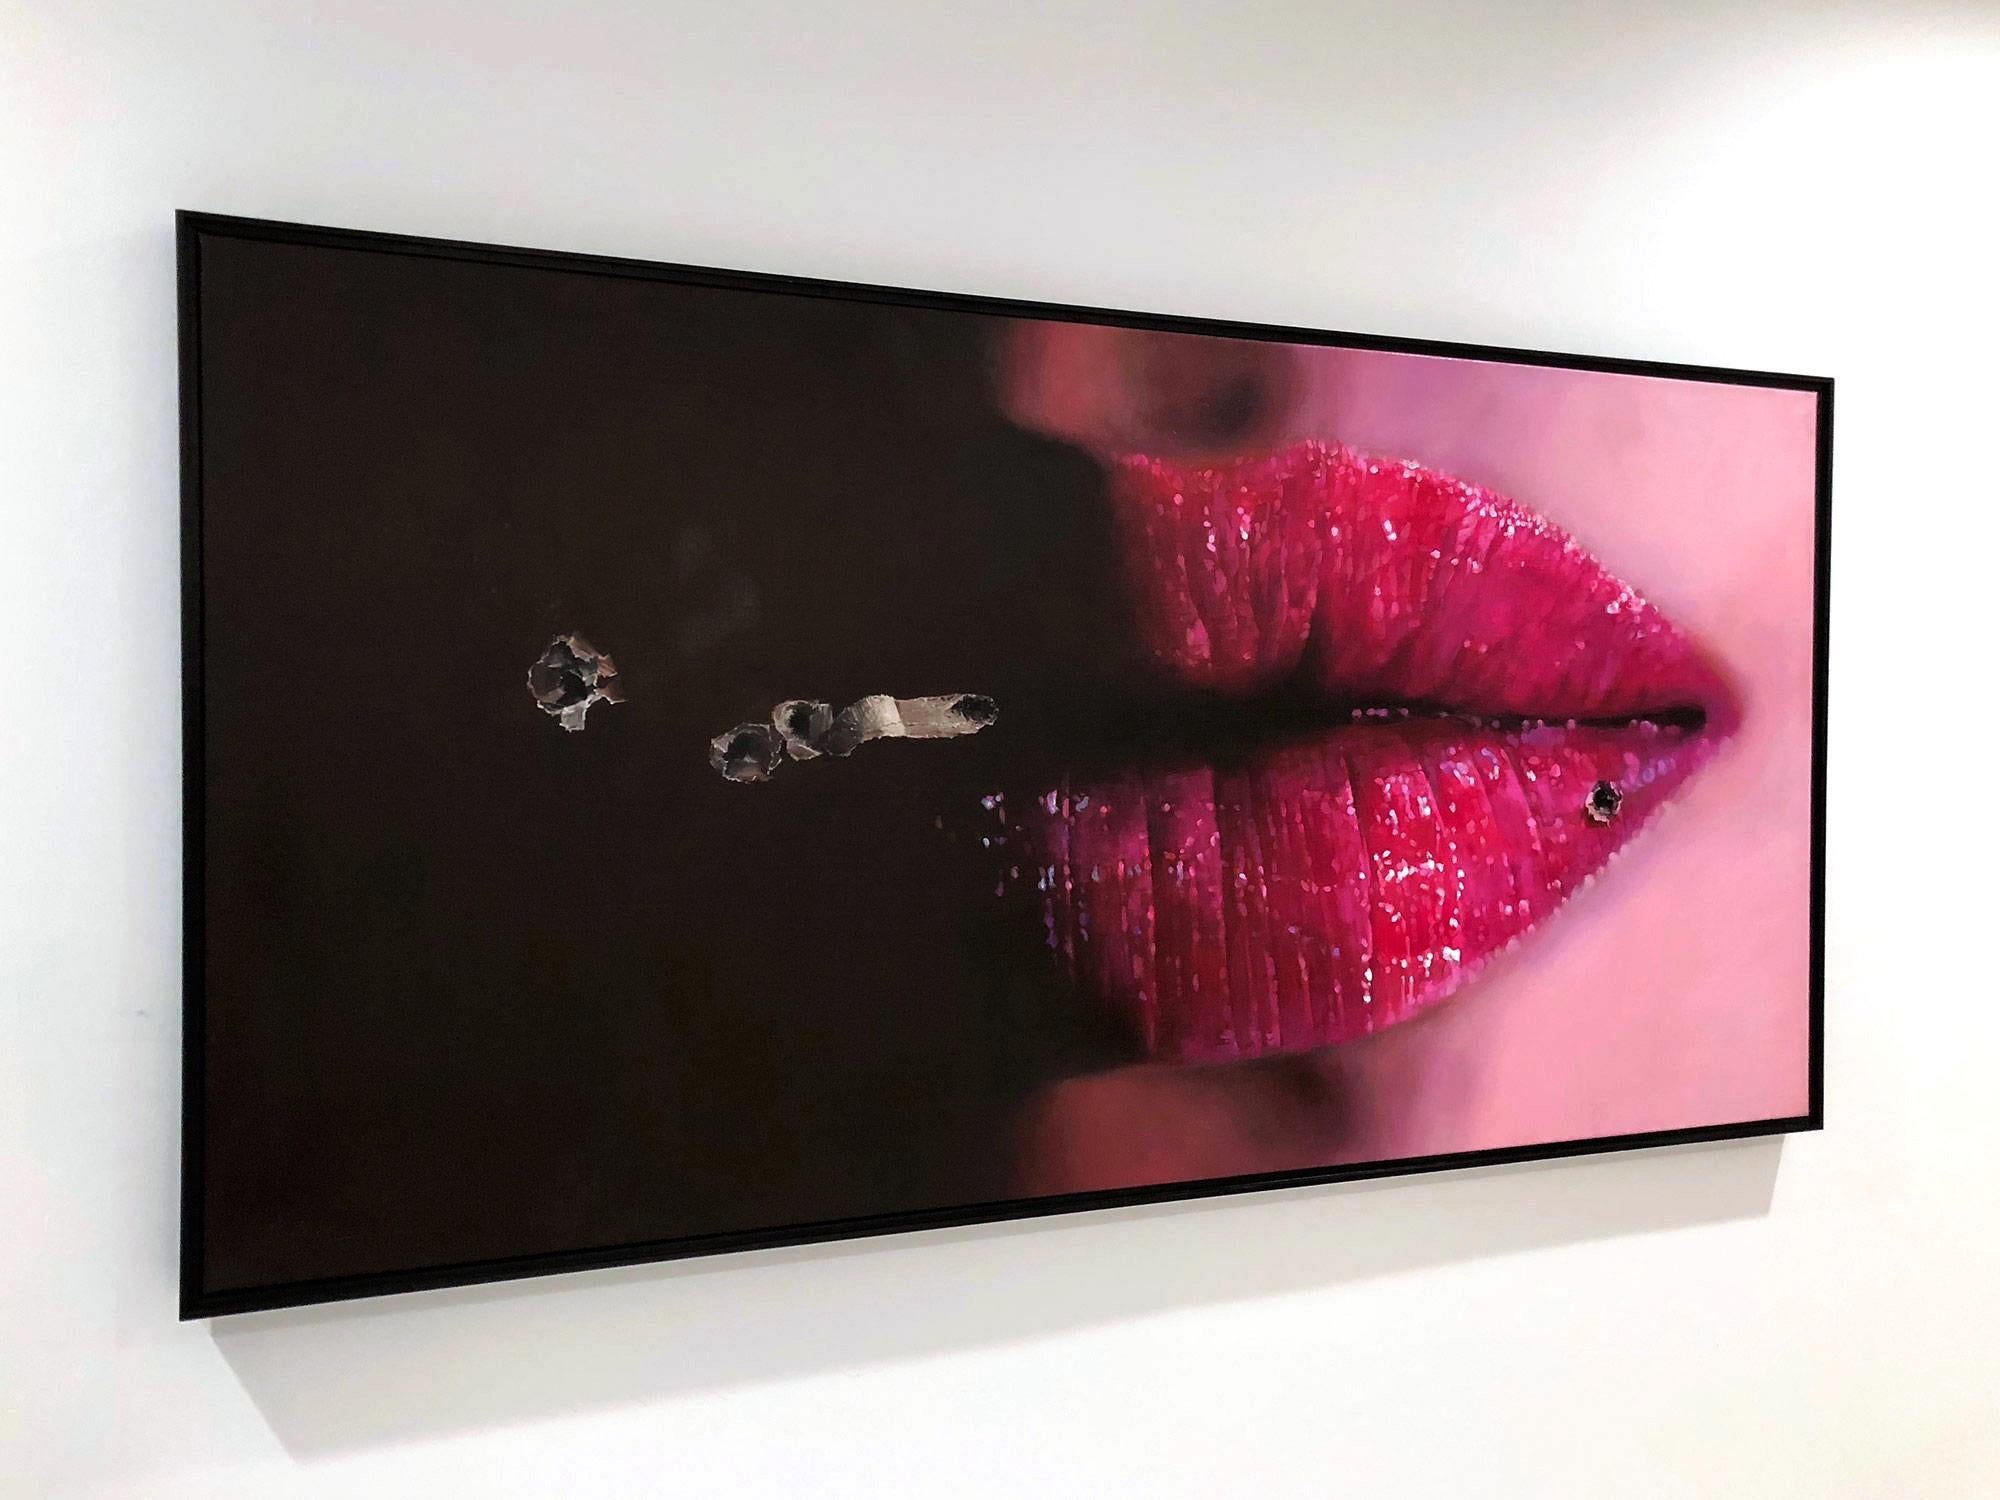 A stunning oil painting depicting a beautiful woman's lips. It is done in a photo realistic style which is executed effortlessly by the artist. The deep pink and contrast of darkness behind the lips invite the viewer to discover the richness and